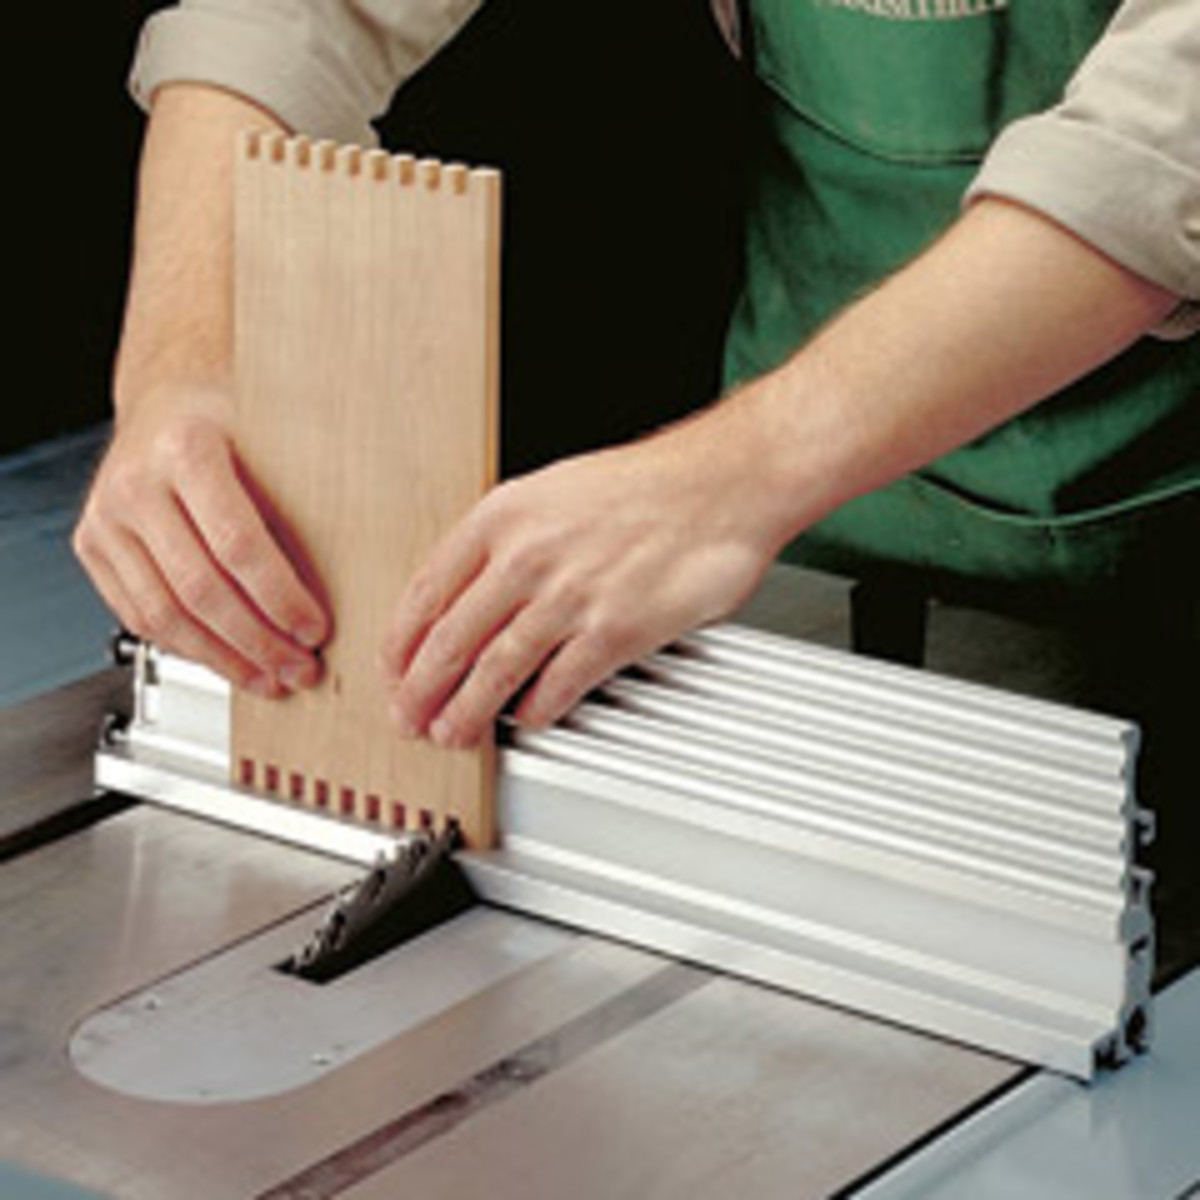 Other joinery jigs include this aluminum box joint jig from Woodsmith for the table saw and dado head that can be used to make accurate drawer joints.